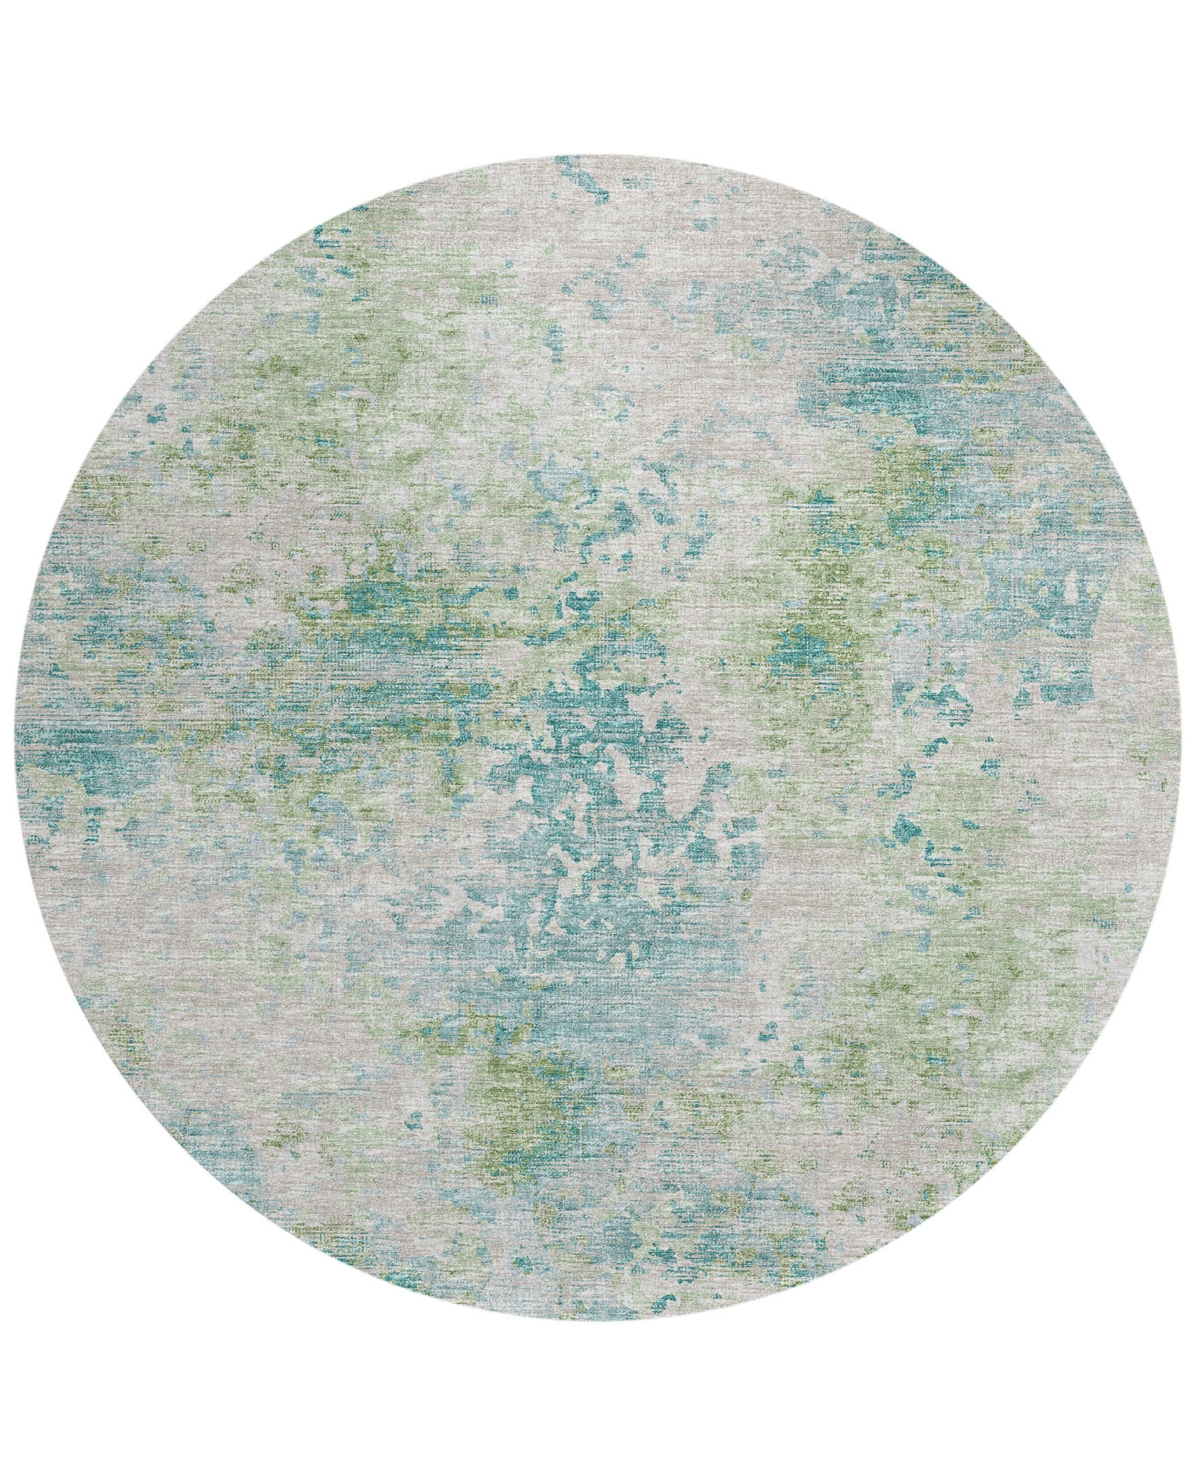 Addison Accord Outdoor Washable AAC35 8' x 8' Round Area Rug - Green